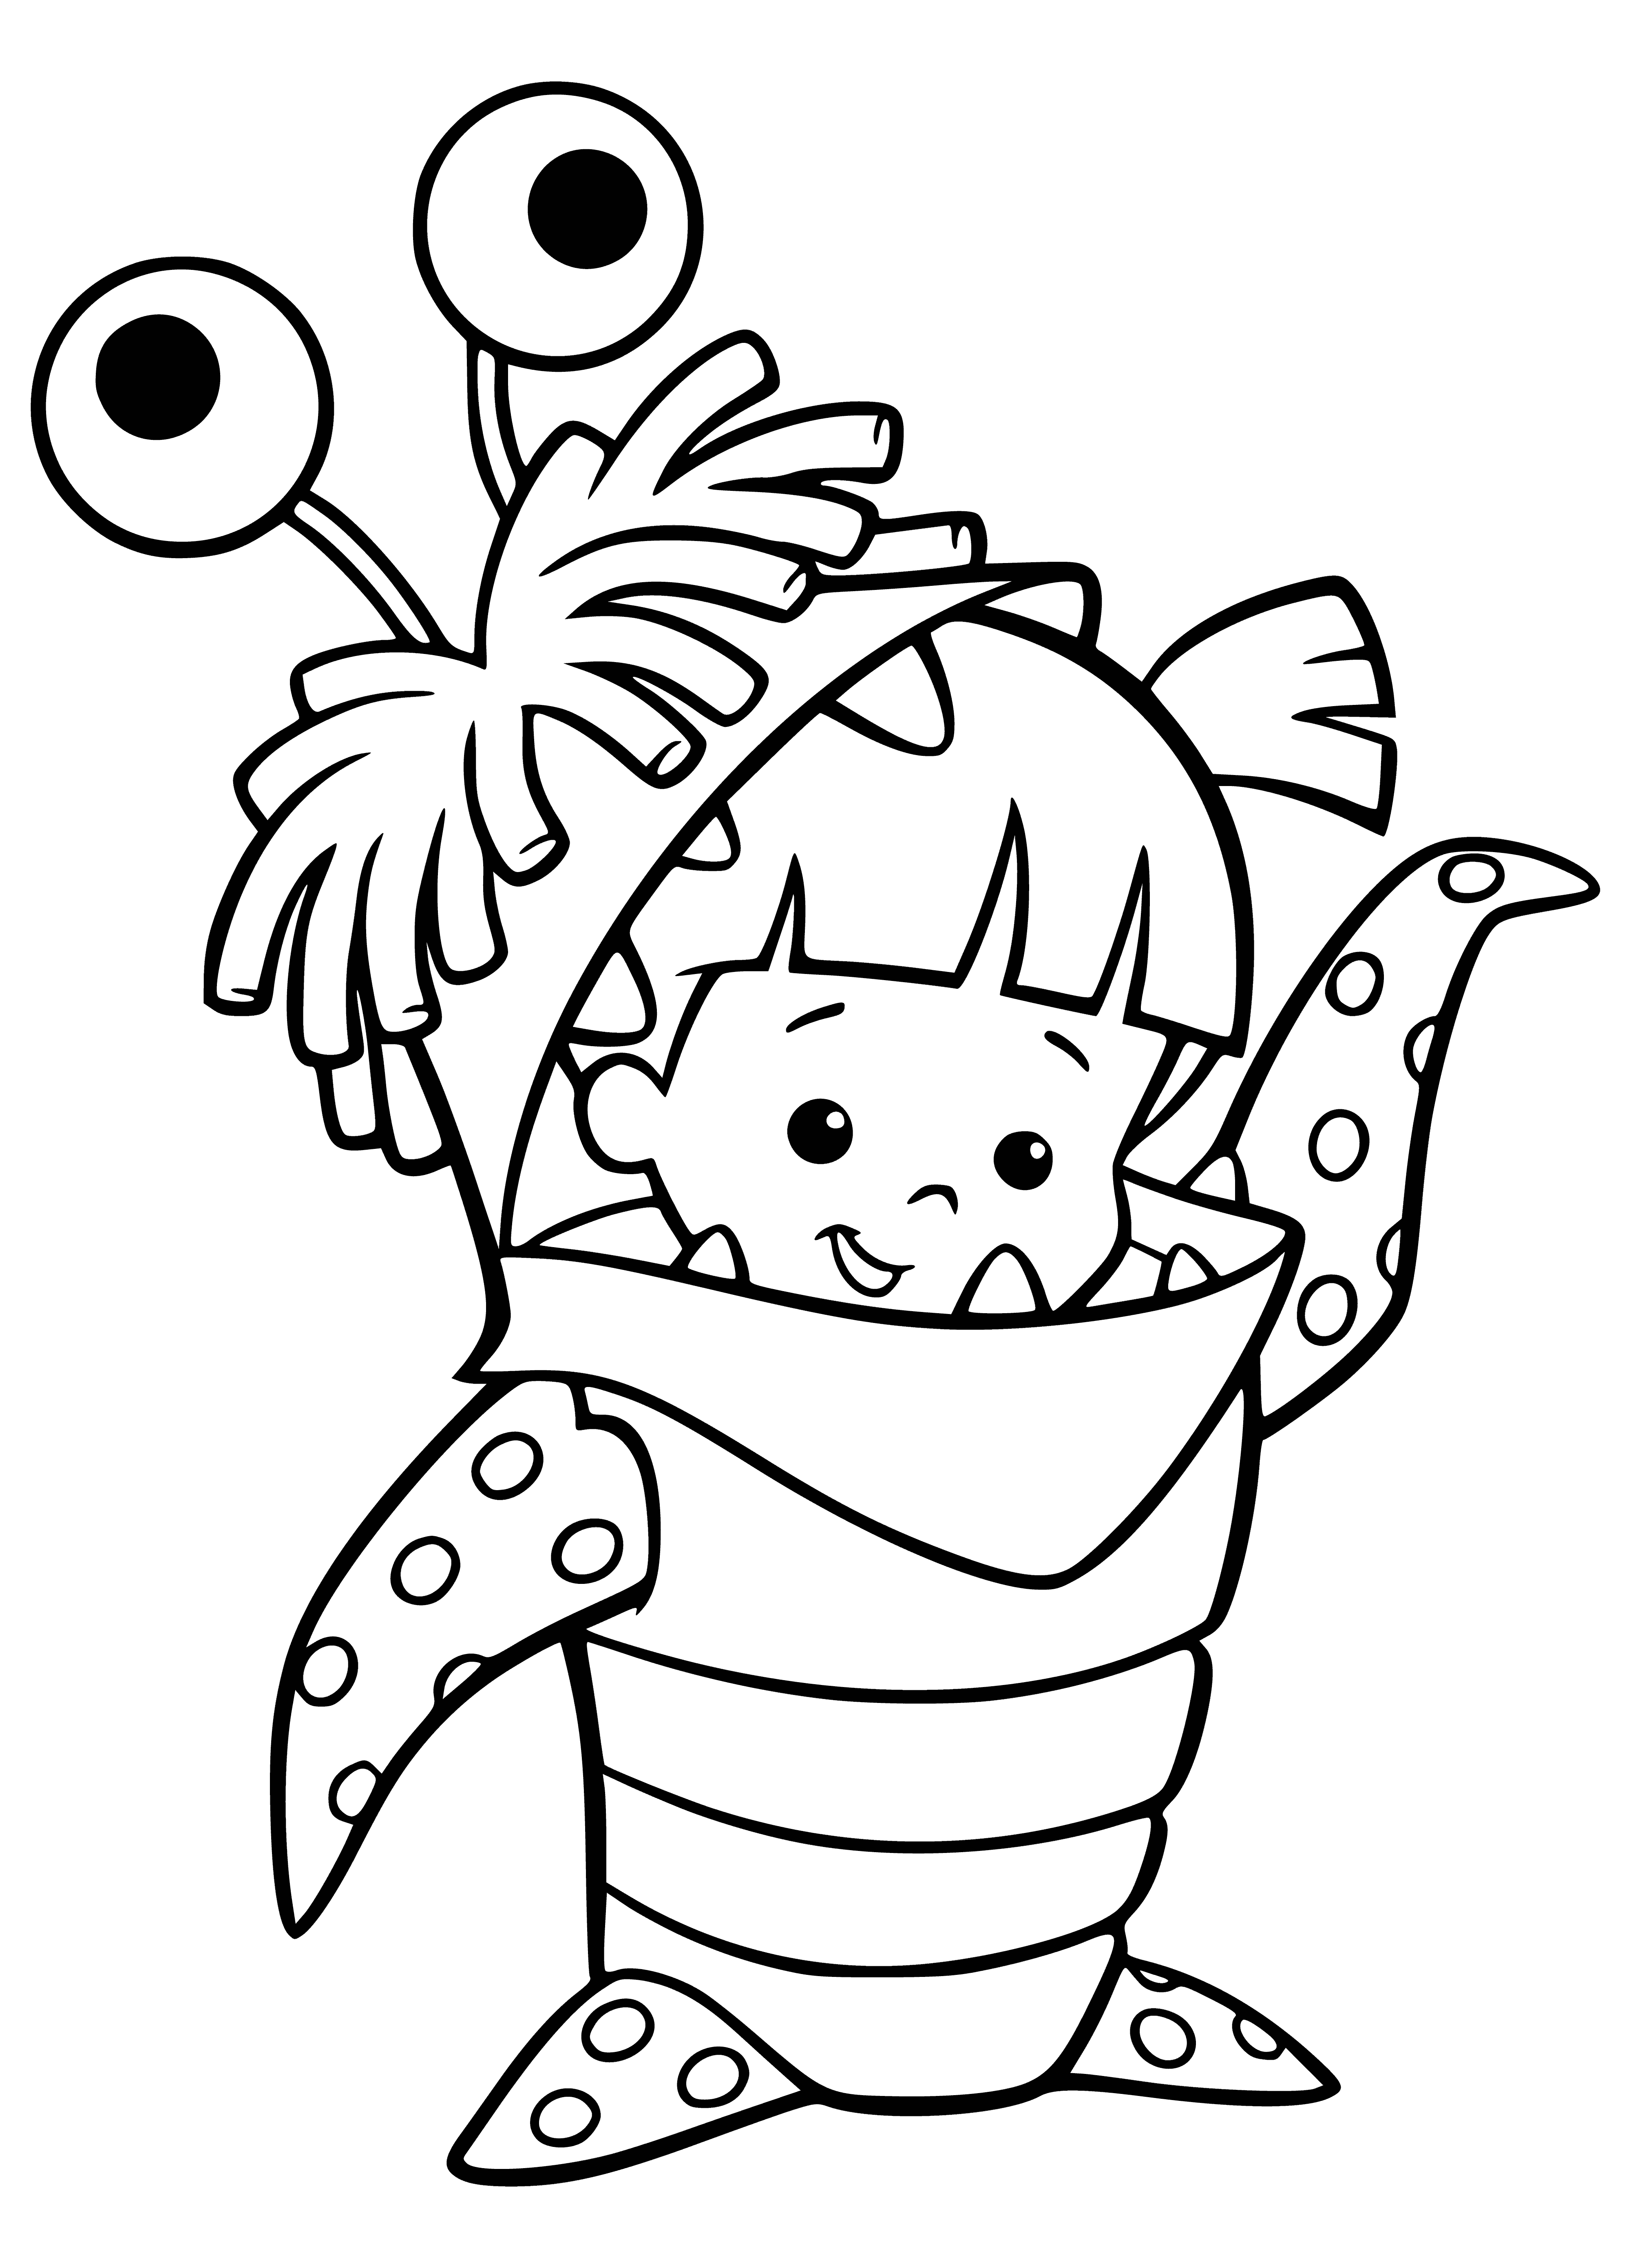 Scarecrow coloring page